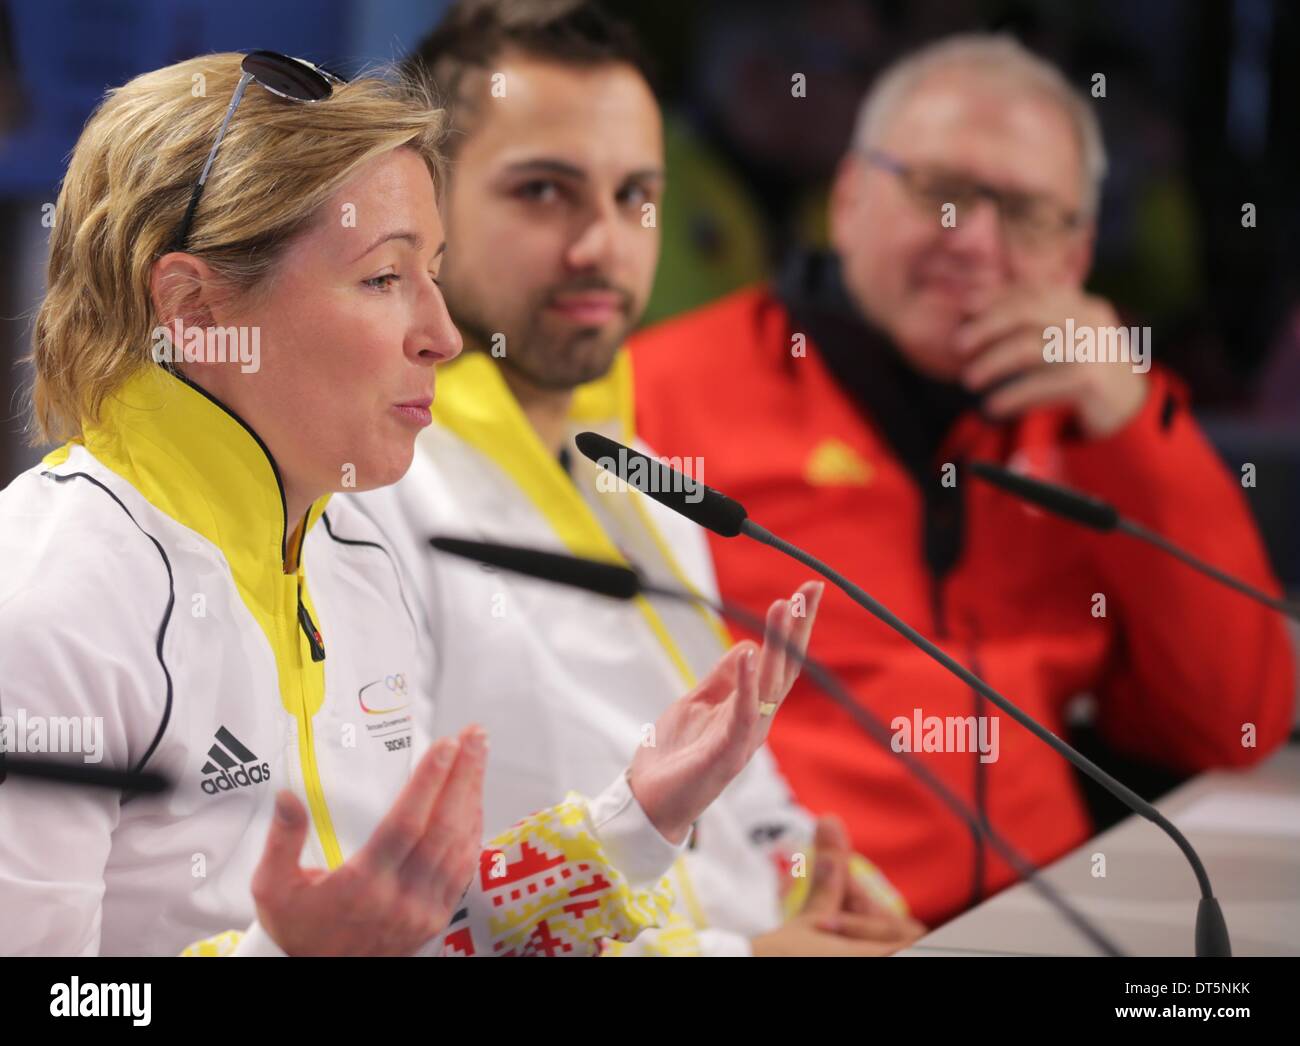 Krasnaya Polyana, Krasnodar region, Russia. 10th Feb, 2014. (L-R) speed skater Claudia Pechstein, luger Andi Langenhan of Germany and Michael Vesper, Chef de Mission and Head of German Olympic Team, attend a press conference at the Deutsches Haus (German House) at the Sochi 2014 Olympic Games in Gorki Village near Krasnaya Polyana, Krasnodar region, Russia, 10 February 2014. Photo: Kay Nietfeld/dpa/Alamy Live News Stock Photo